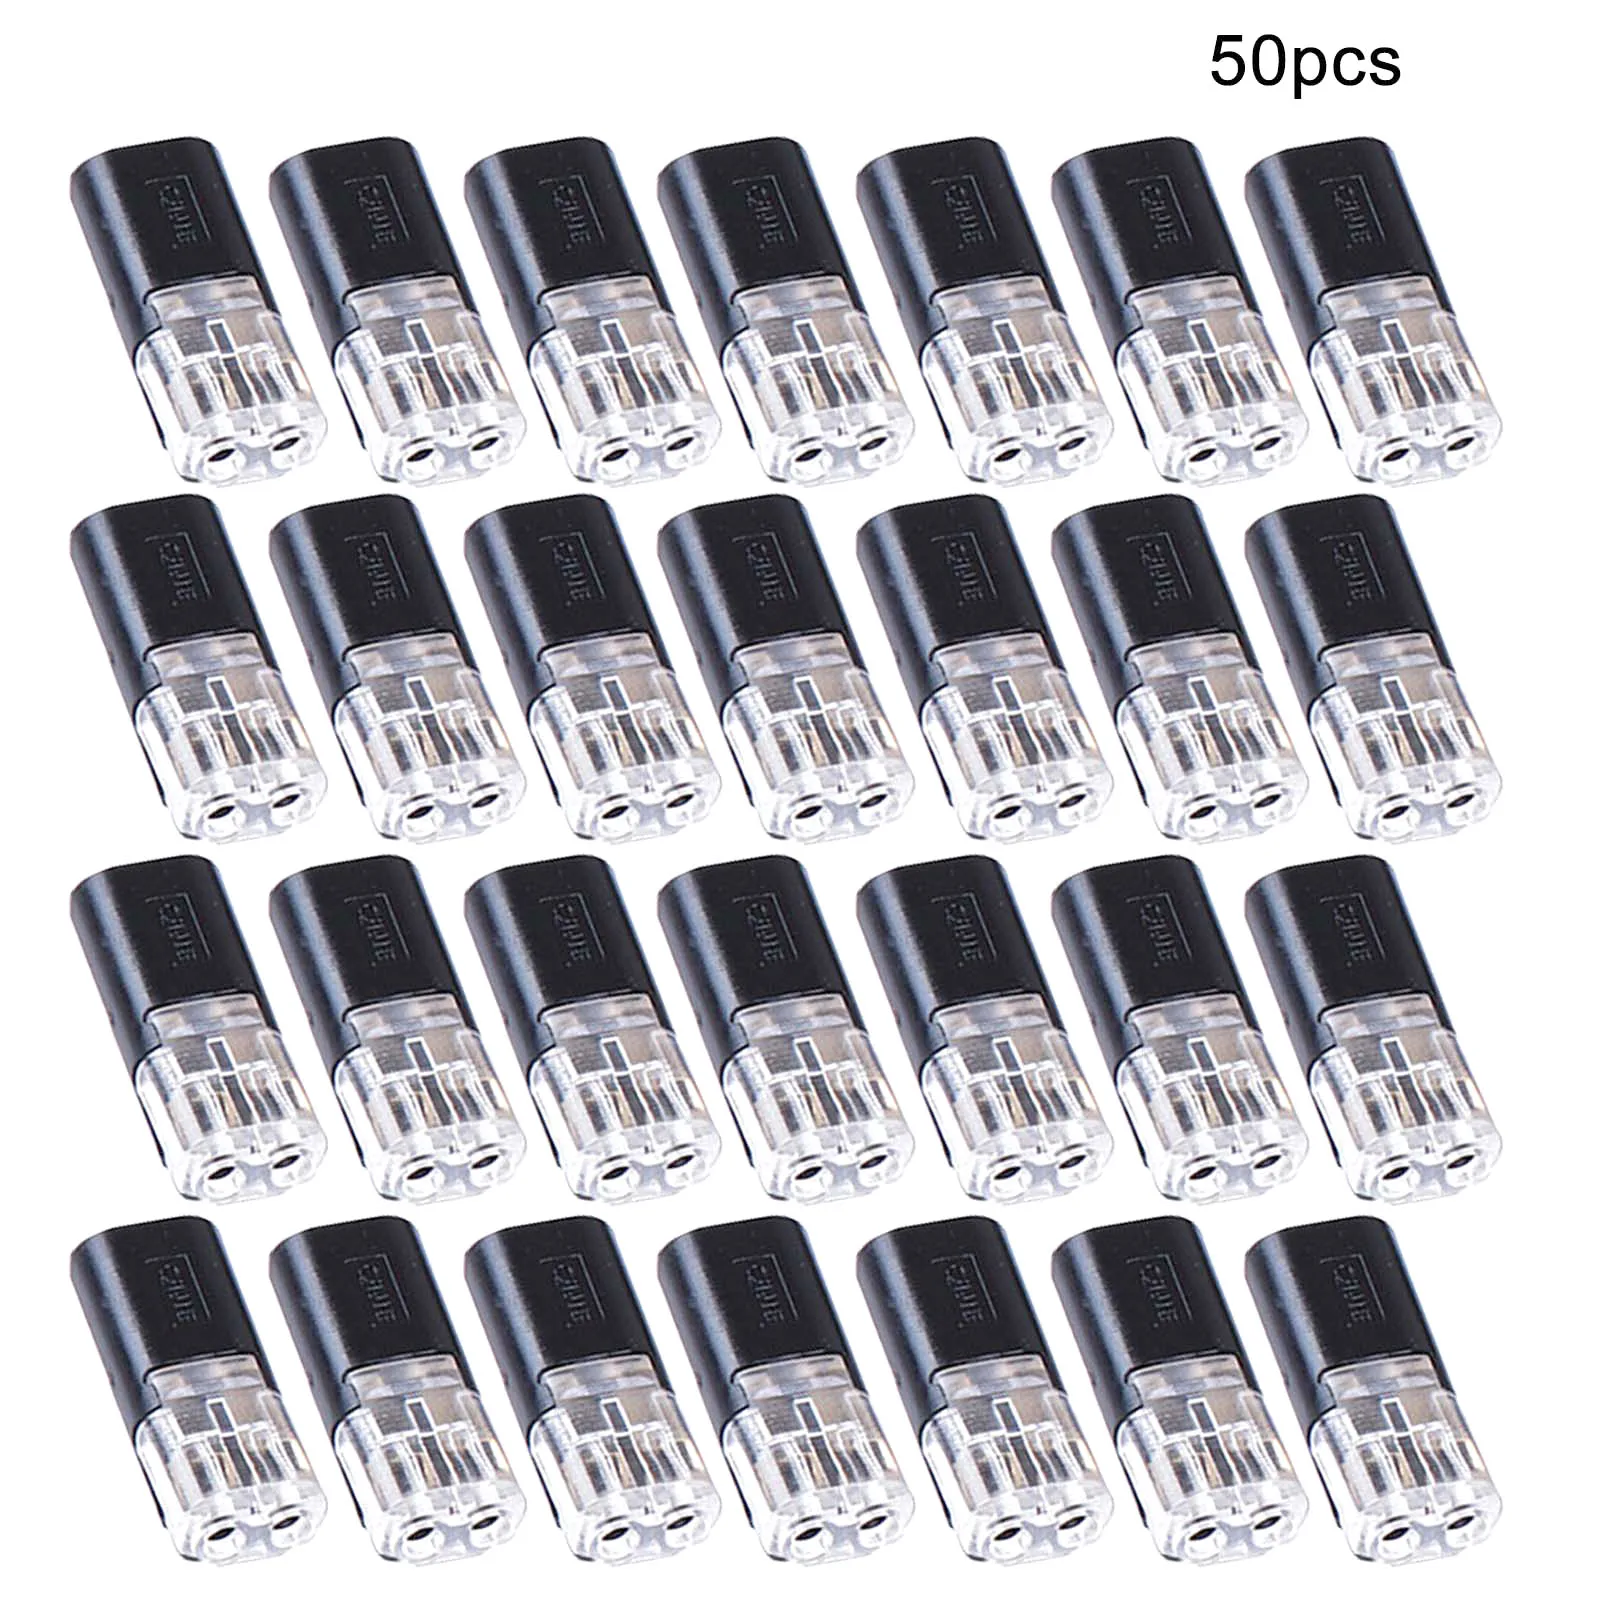 

50pcs Wiring Terminals For 18-22AWG Wire Electrical Push-in Professional With Locking Buckle Dual Quick Wire Connector